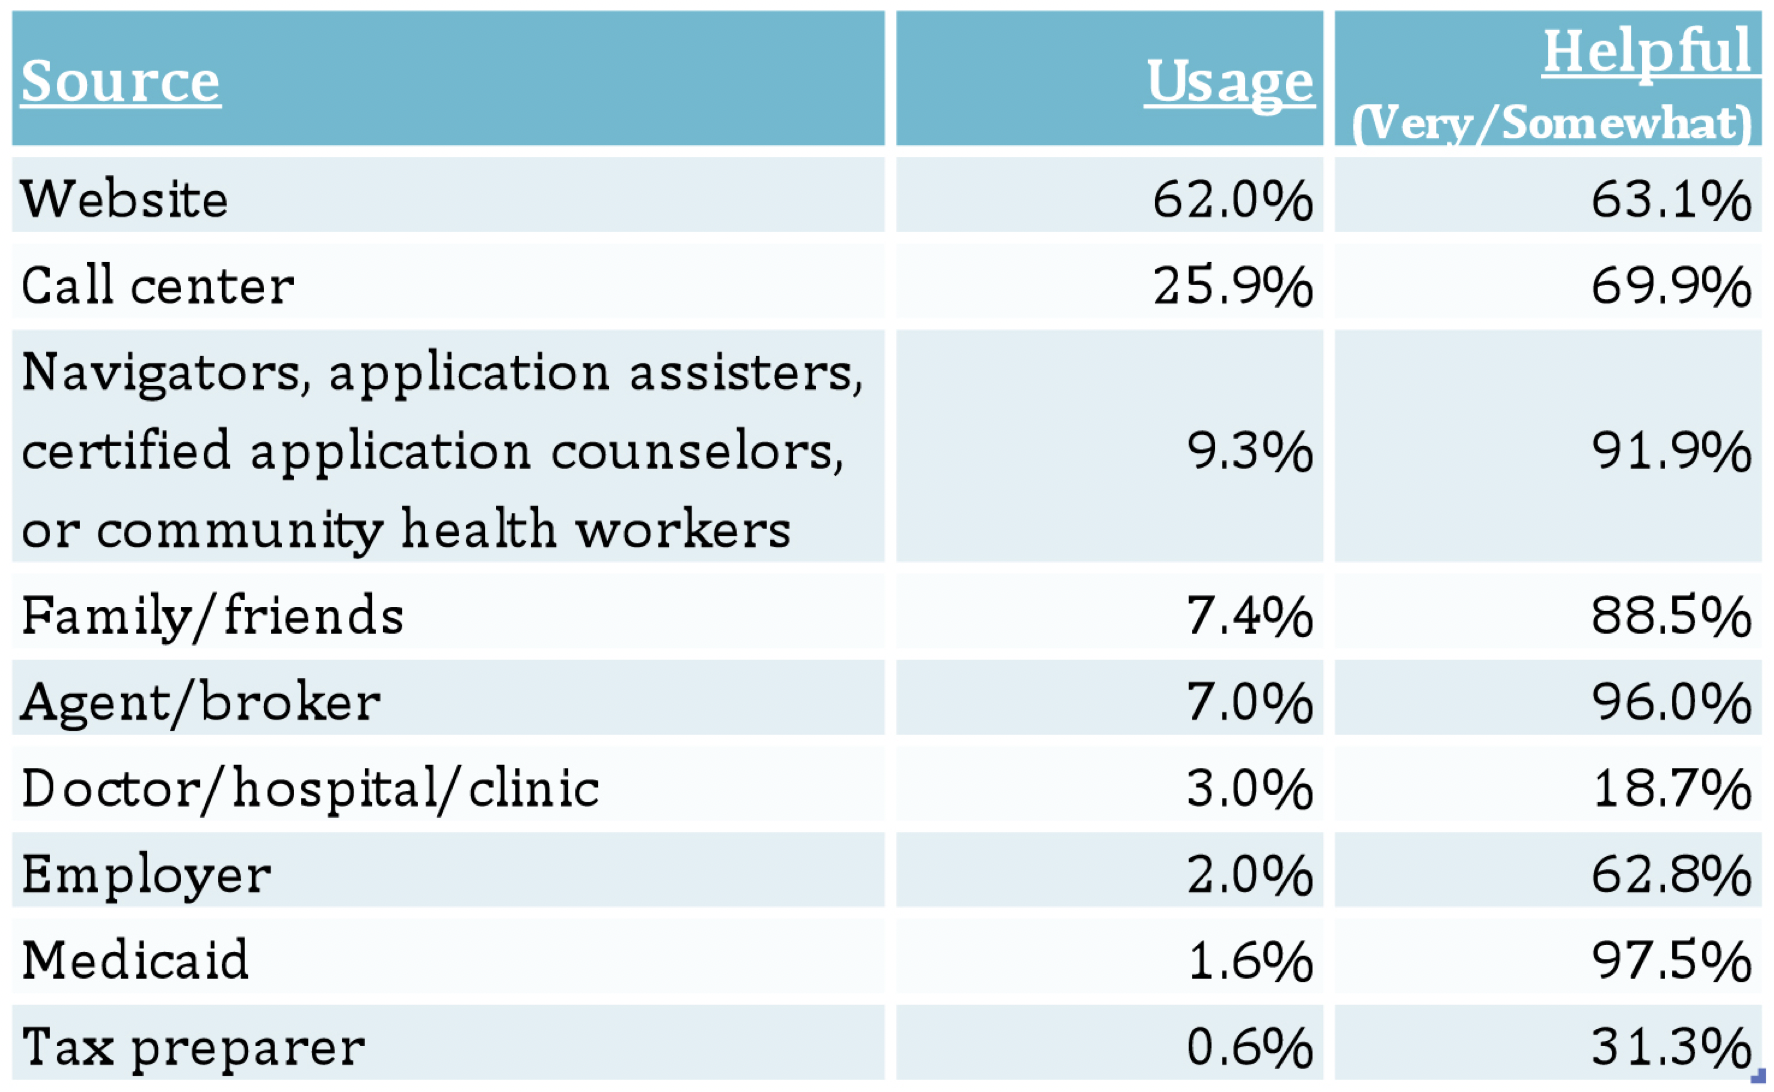 This table compares usage of Marketplace information sources by Texans in June 2014.